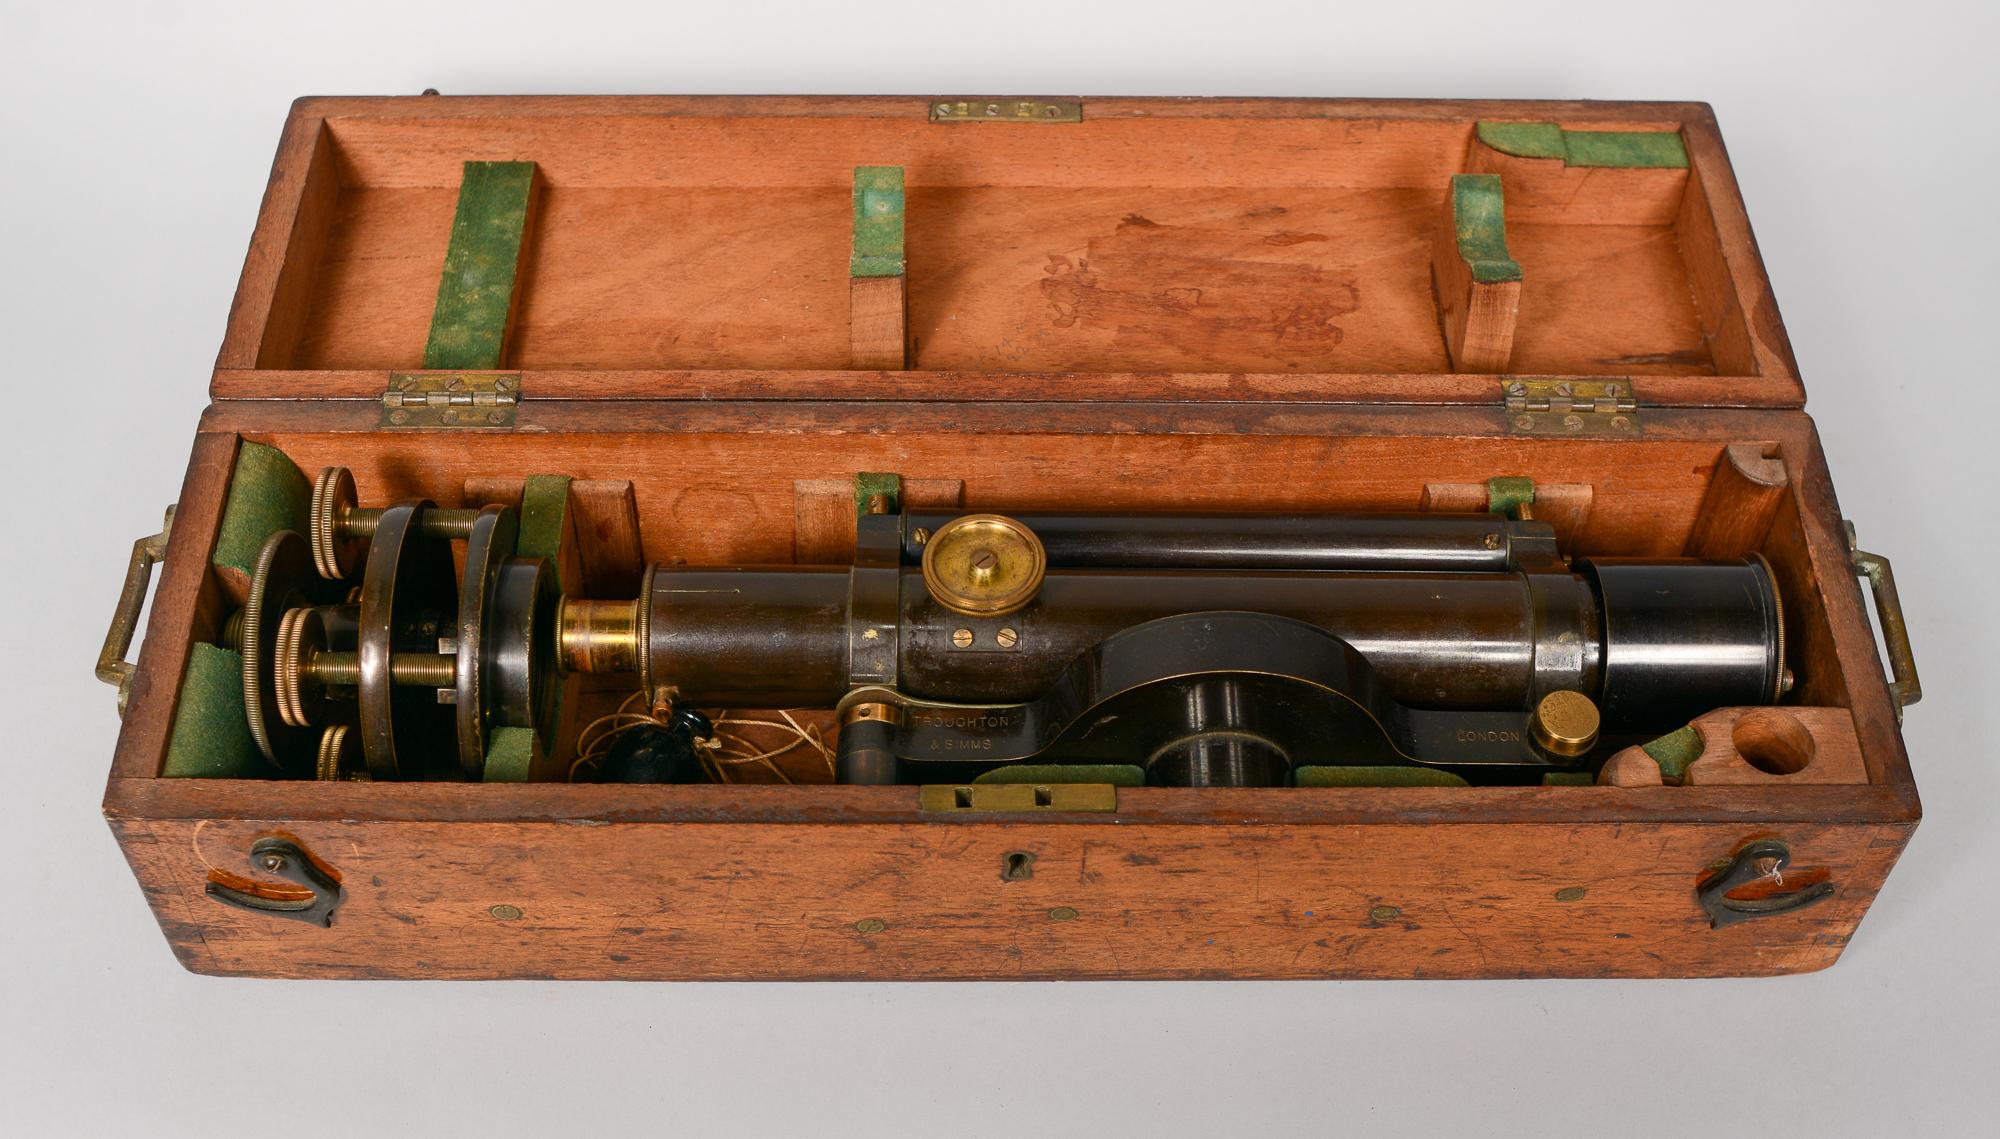 Troughton and Simms London Surveyor's Level in Mahogany Case 3